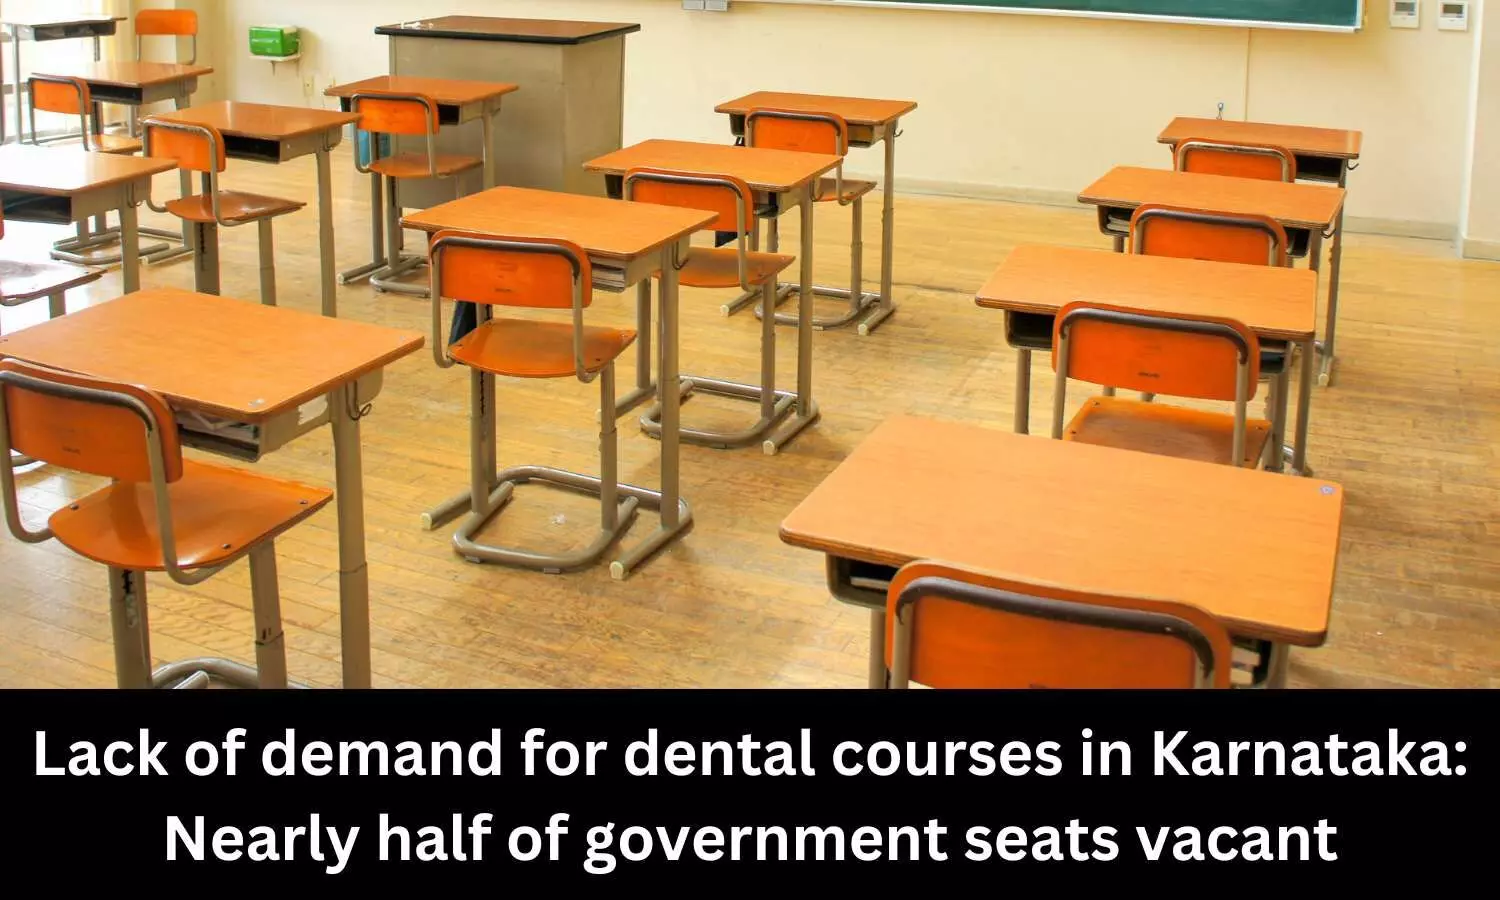 Lack of demand for dental courses in Karnataka: Nearly half of government seats vacant